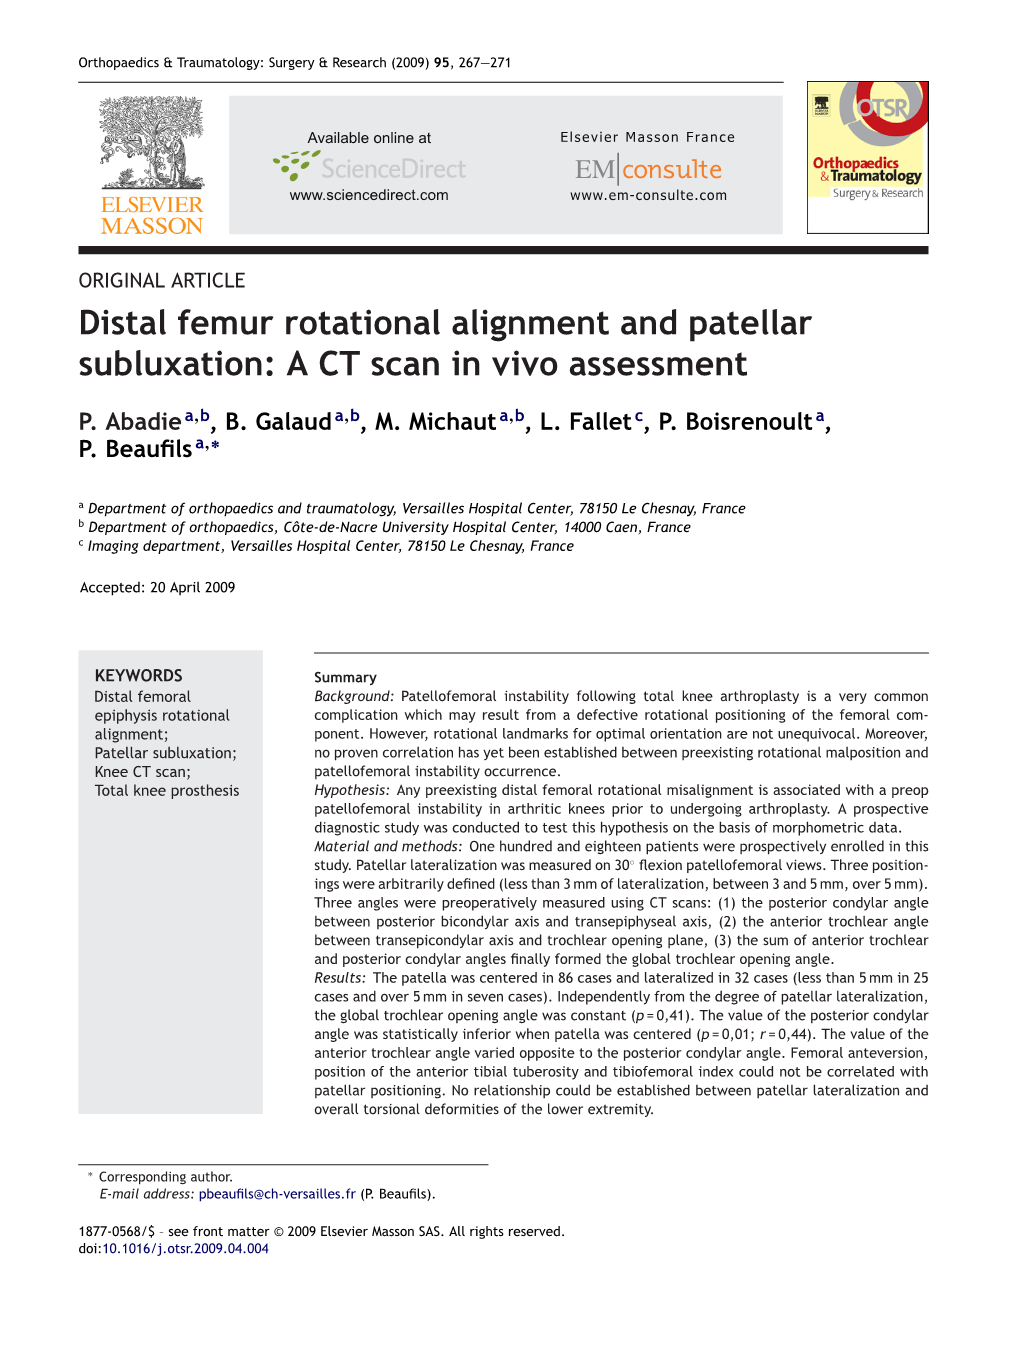 Distal Femur Rotational Alignment and Patellar Subluxation: a CT Scan in Vivo Assessment